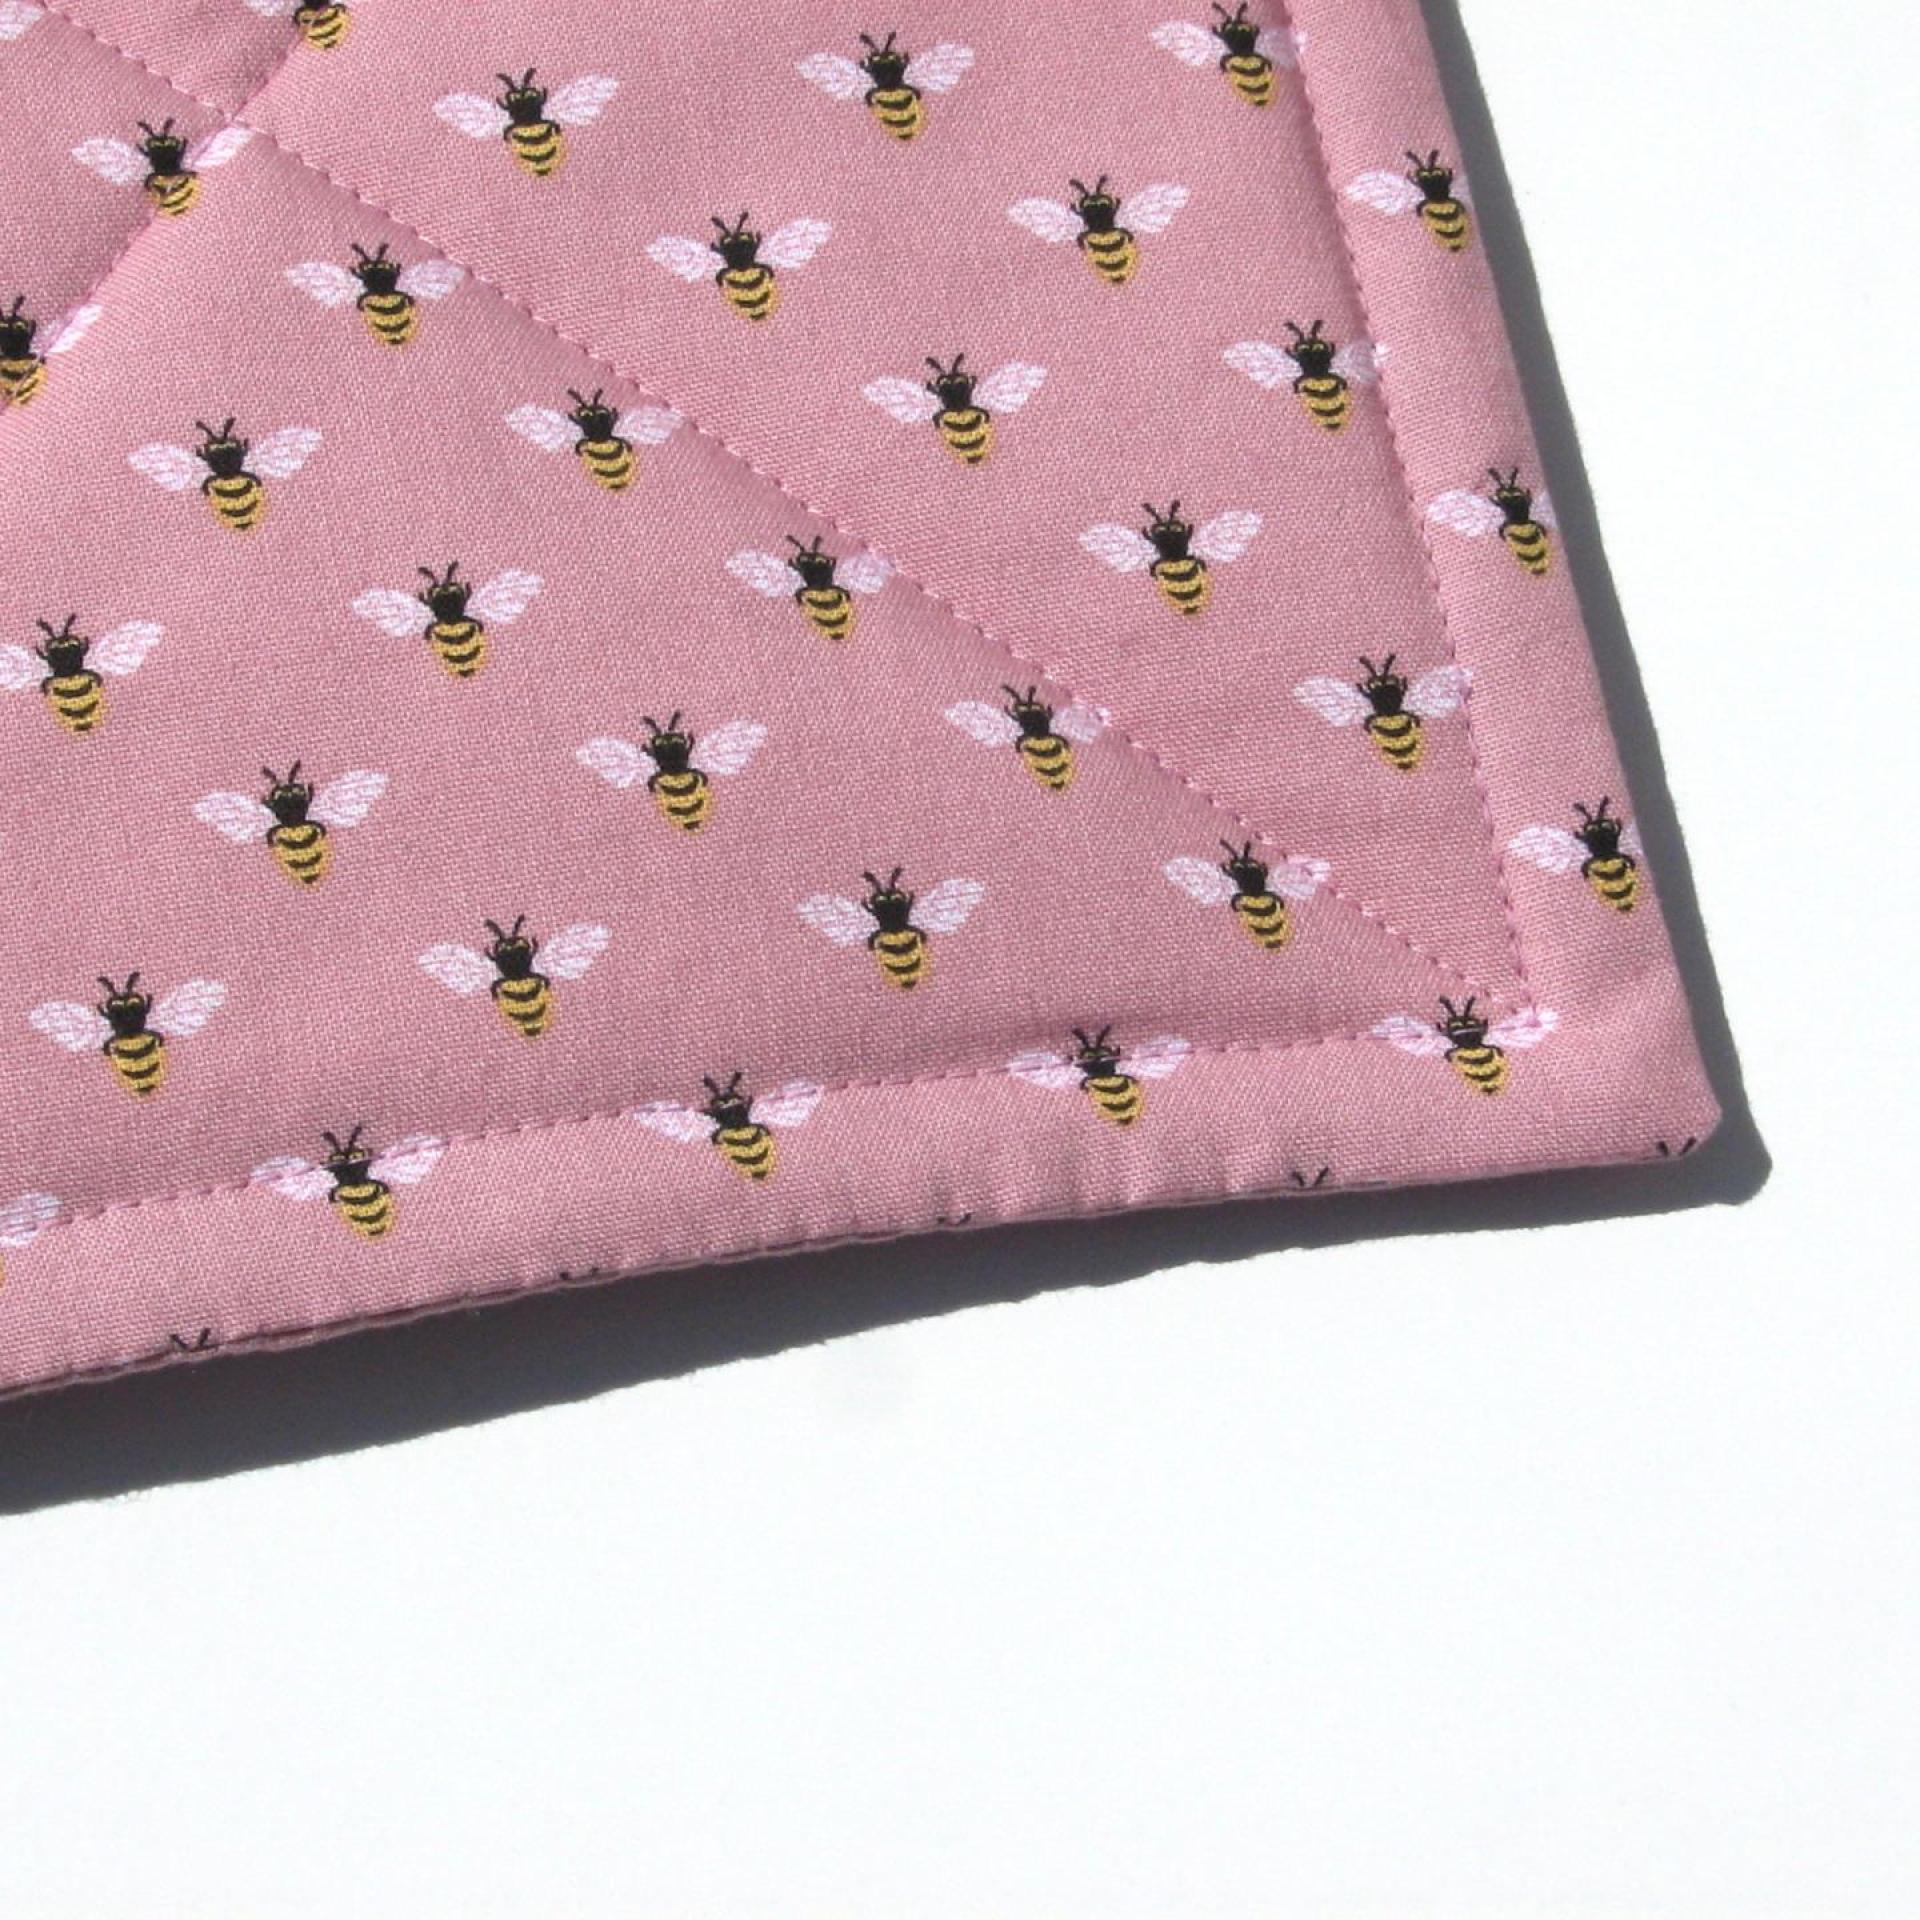 Potholders with Bees on a Dusty Pink Background, Quilted Handmade Hot Pads, Mother's Day or Beekeeper Gift 